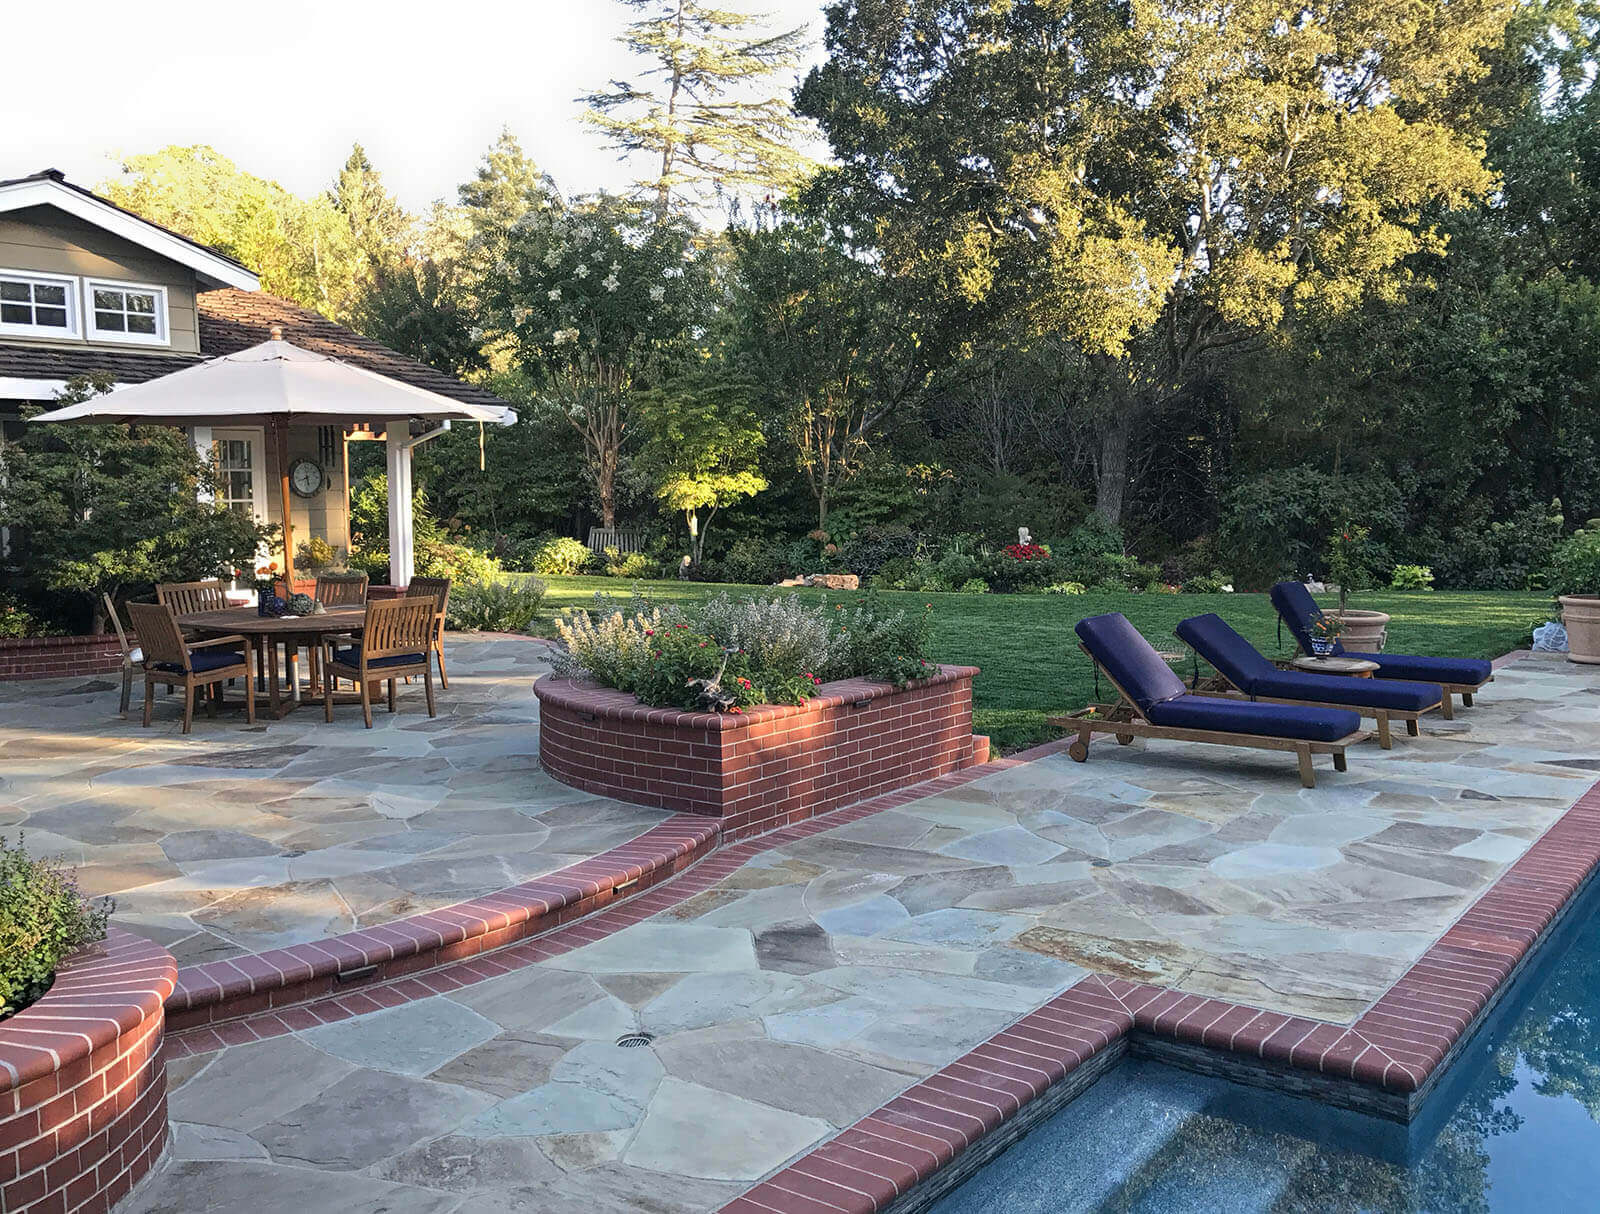 Stone dining patio with brick detailing, poolside lounge, and expansive lawn